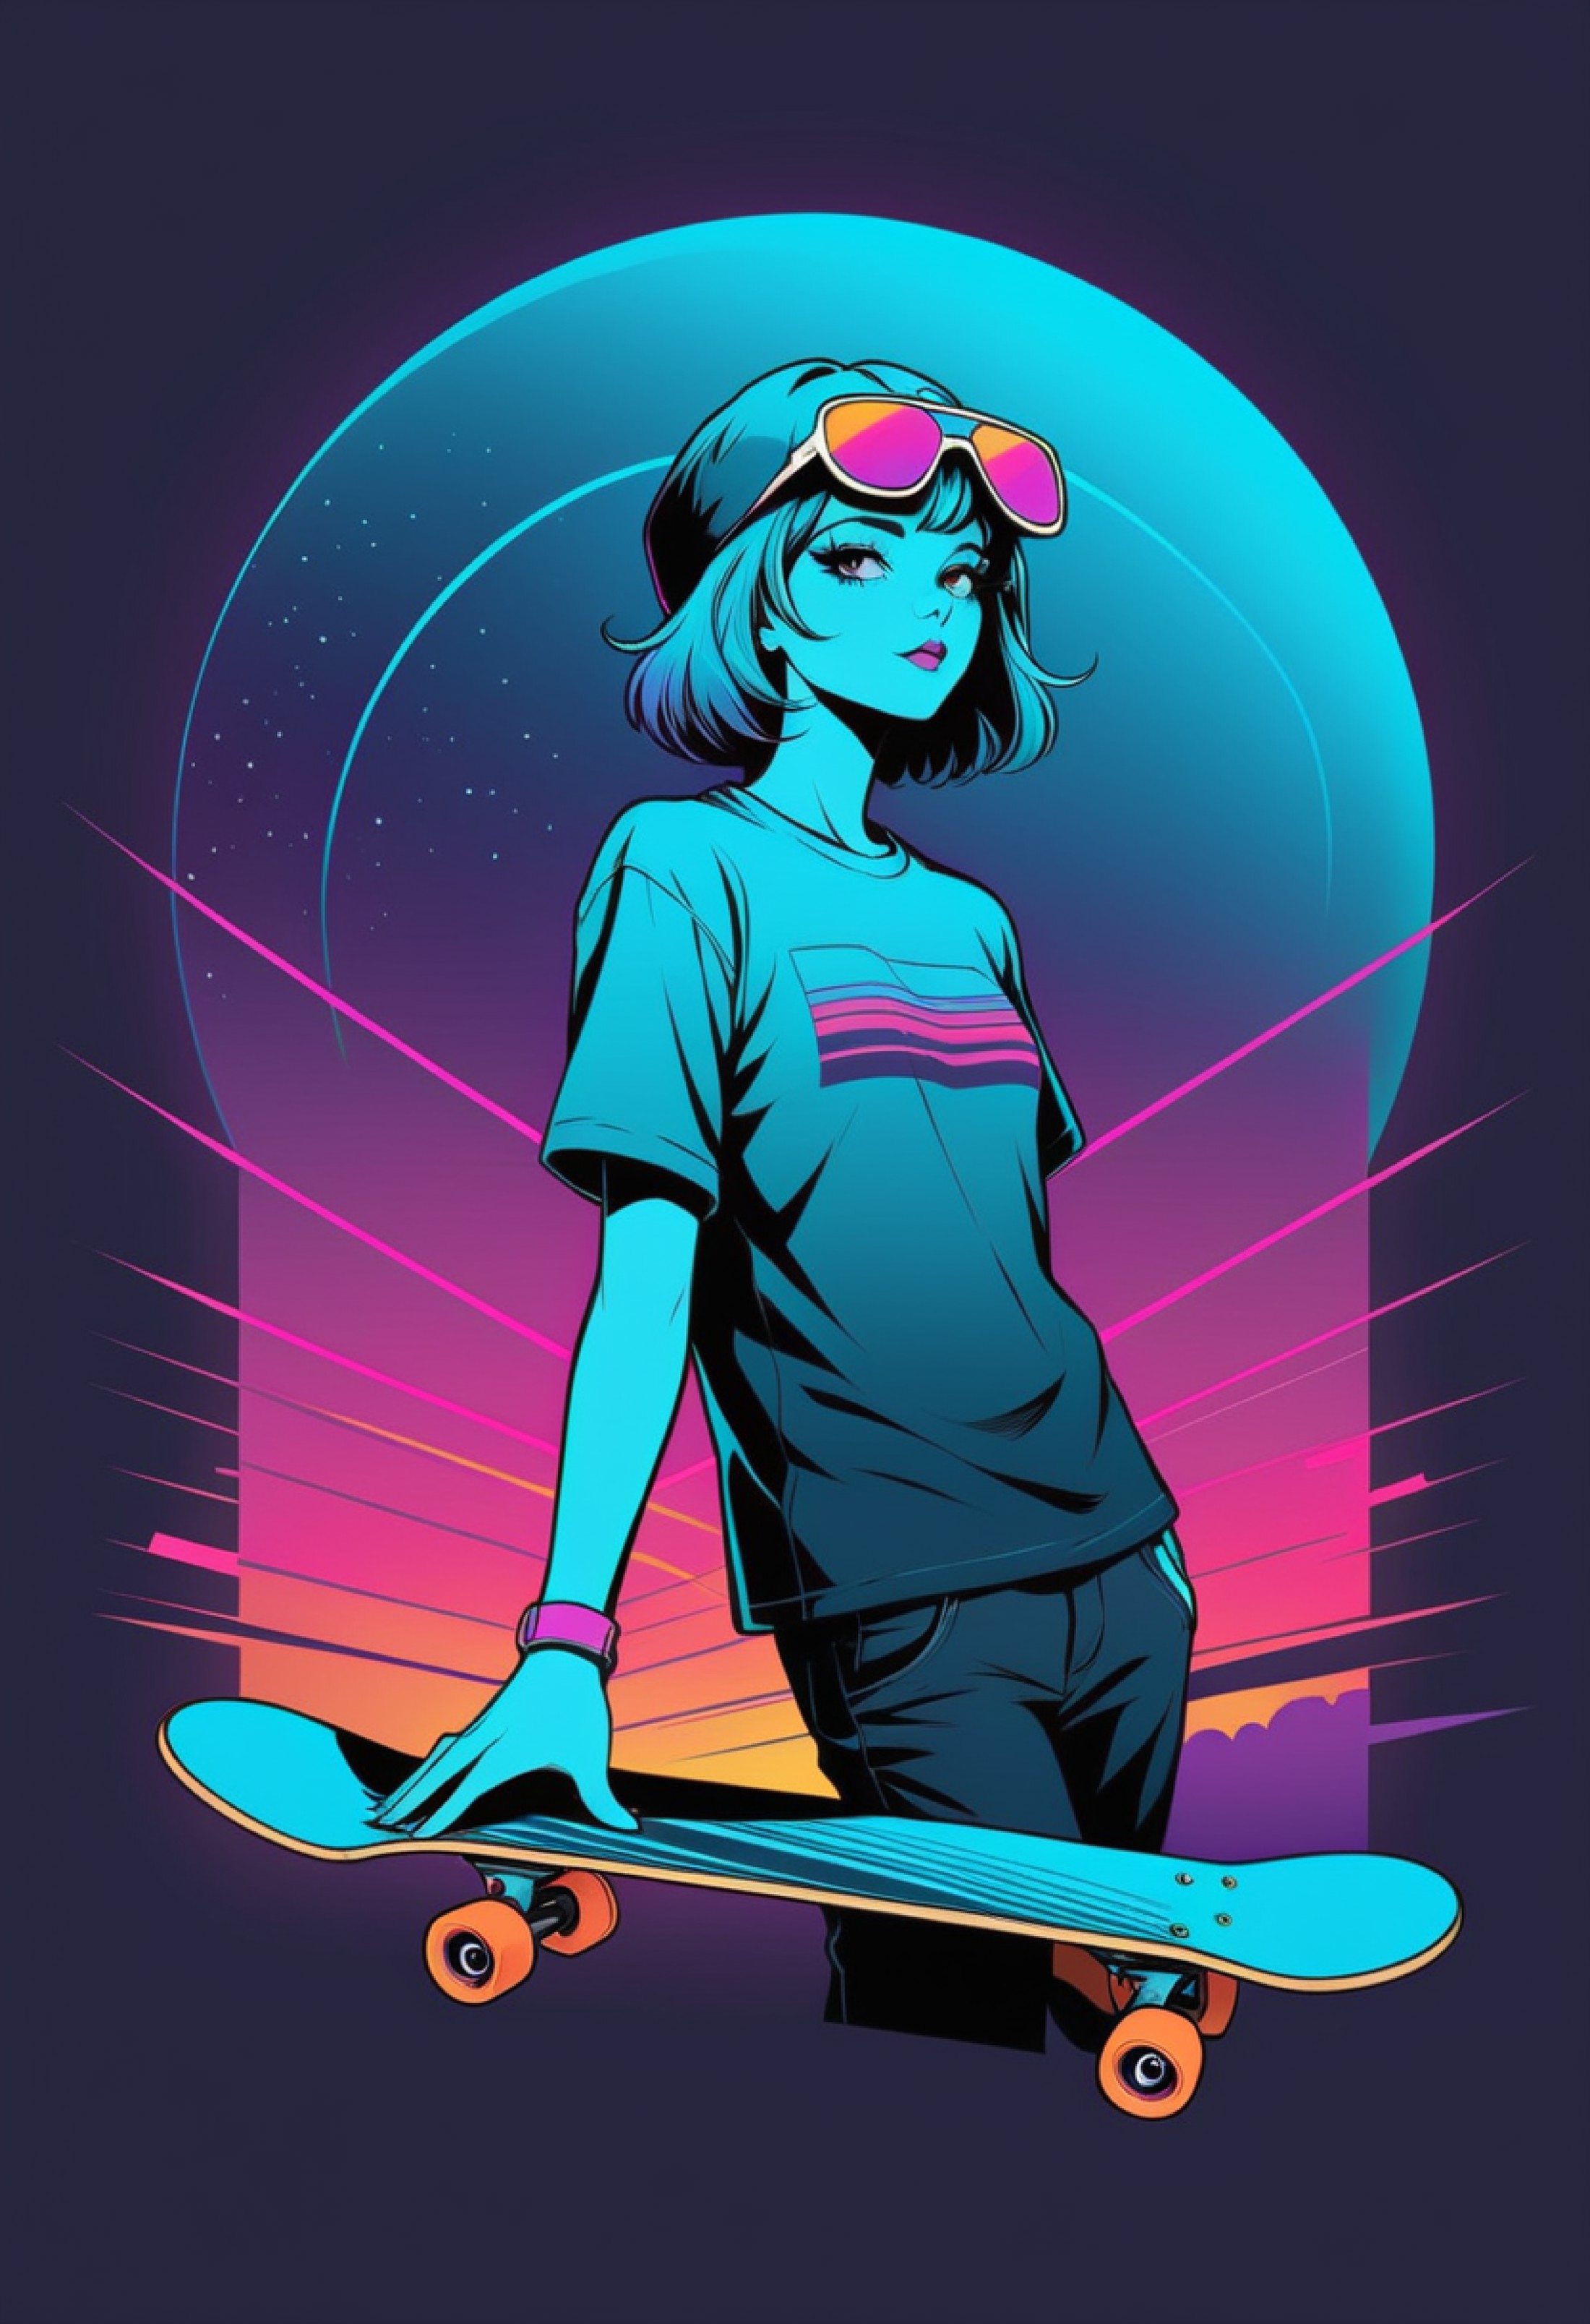 Retro Skateboard, futurism, line art, complementary colors, dreamlike, synthwave t-shirt vector, center composition graphi...